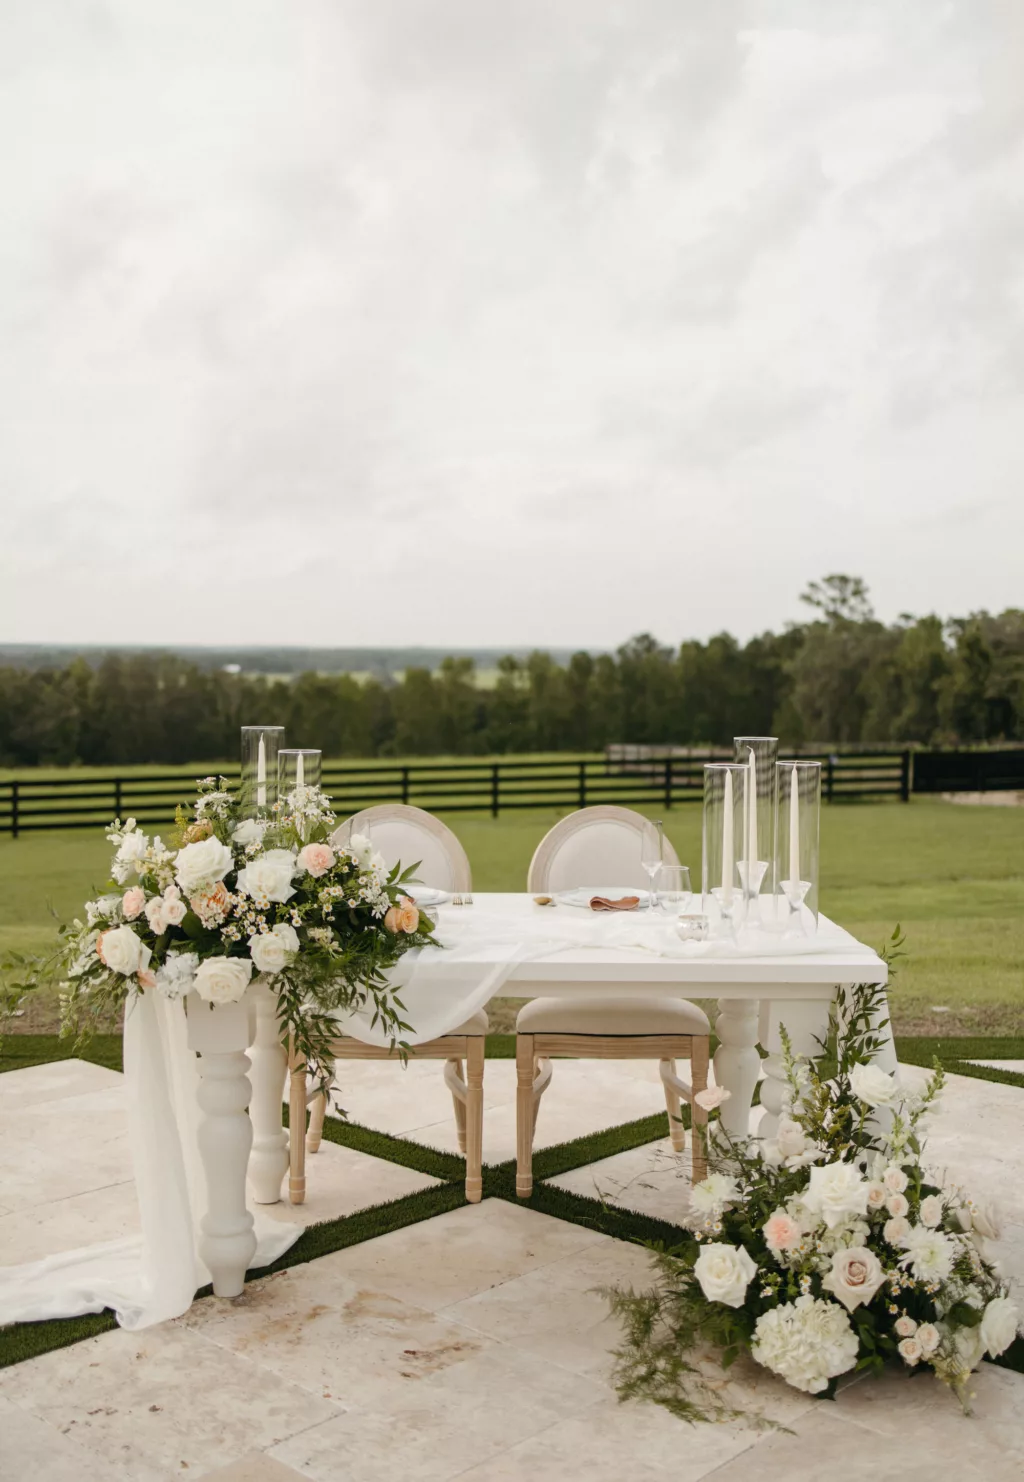 Elegant White Wedding Reception Sweetheart Table Inspiration | Taper Candle and Hurricane Glass Tube | Spring Table Top and Floor Floral Arrangement with Pink Roses, White Hydrangeas, and Greenery Ideas | Tampa Bay Event Venue La Hacienda on Snow Hill